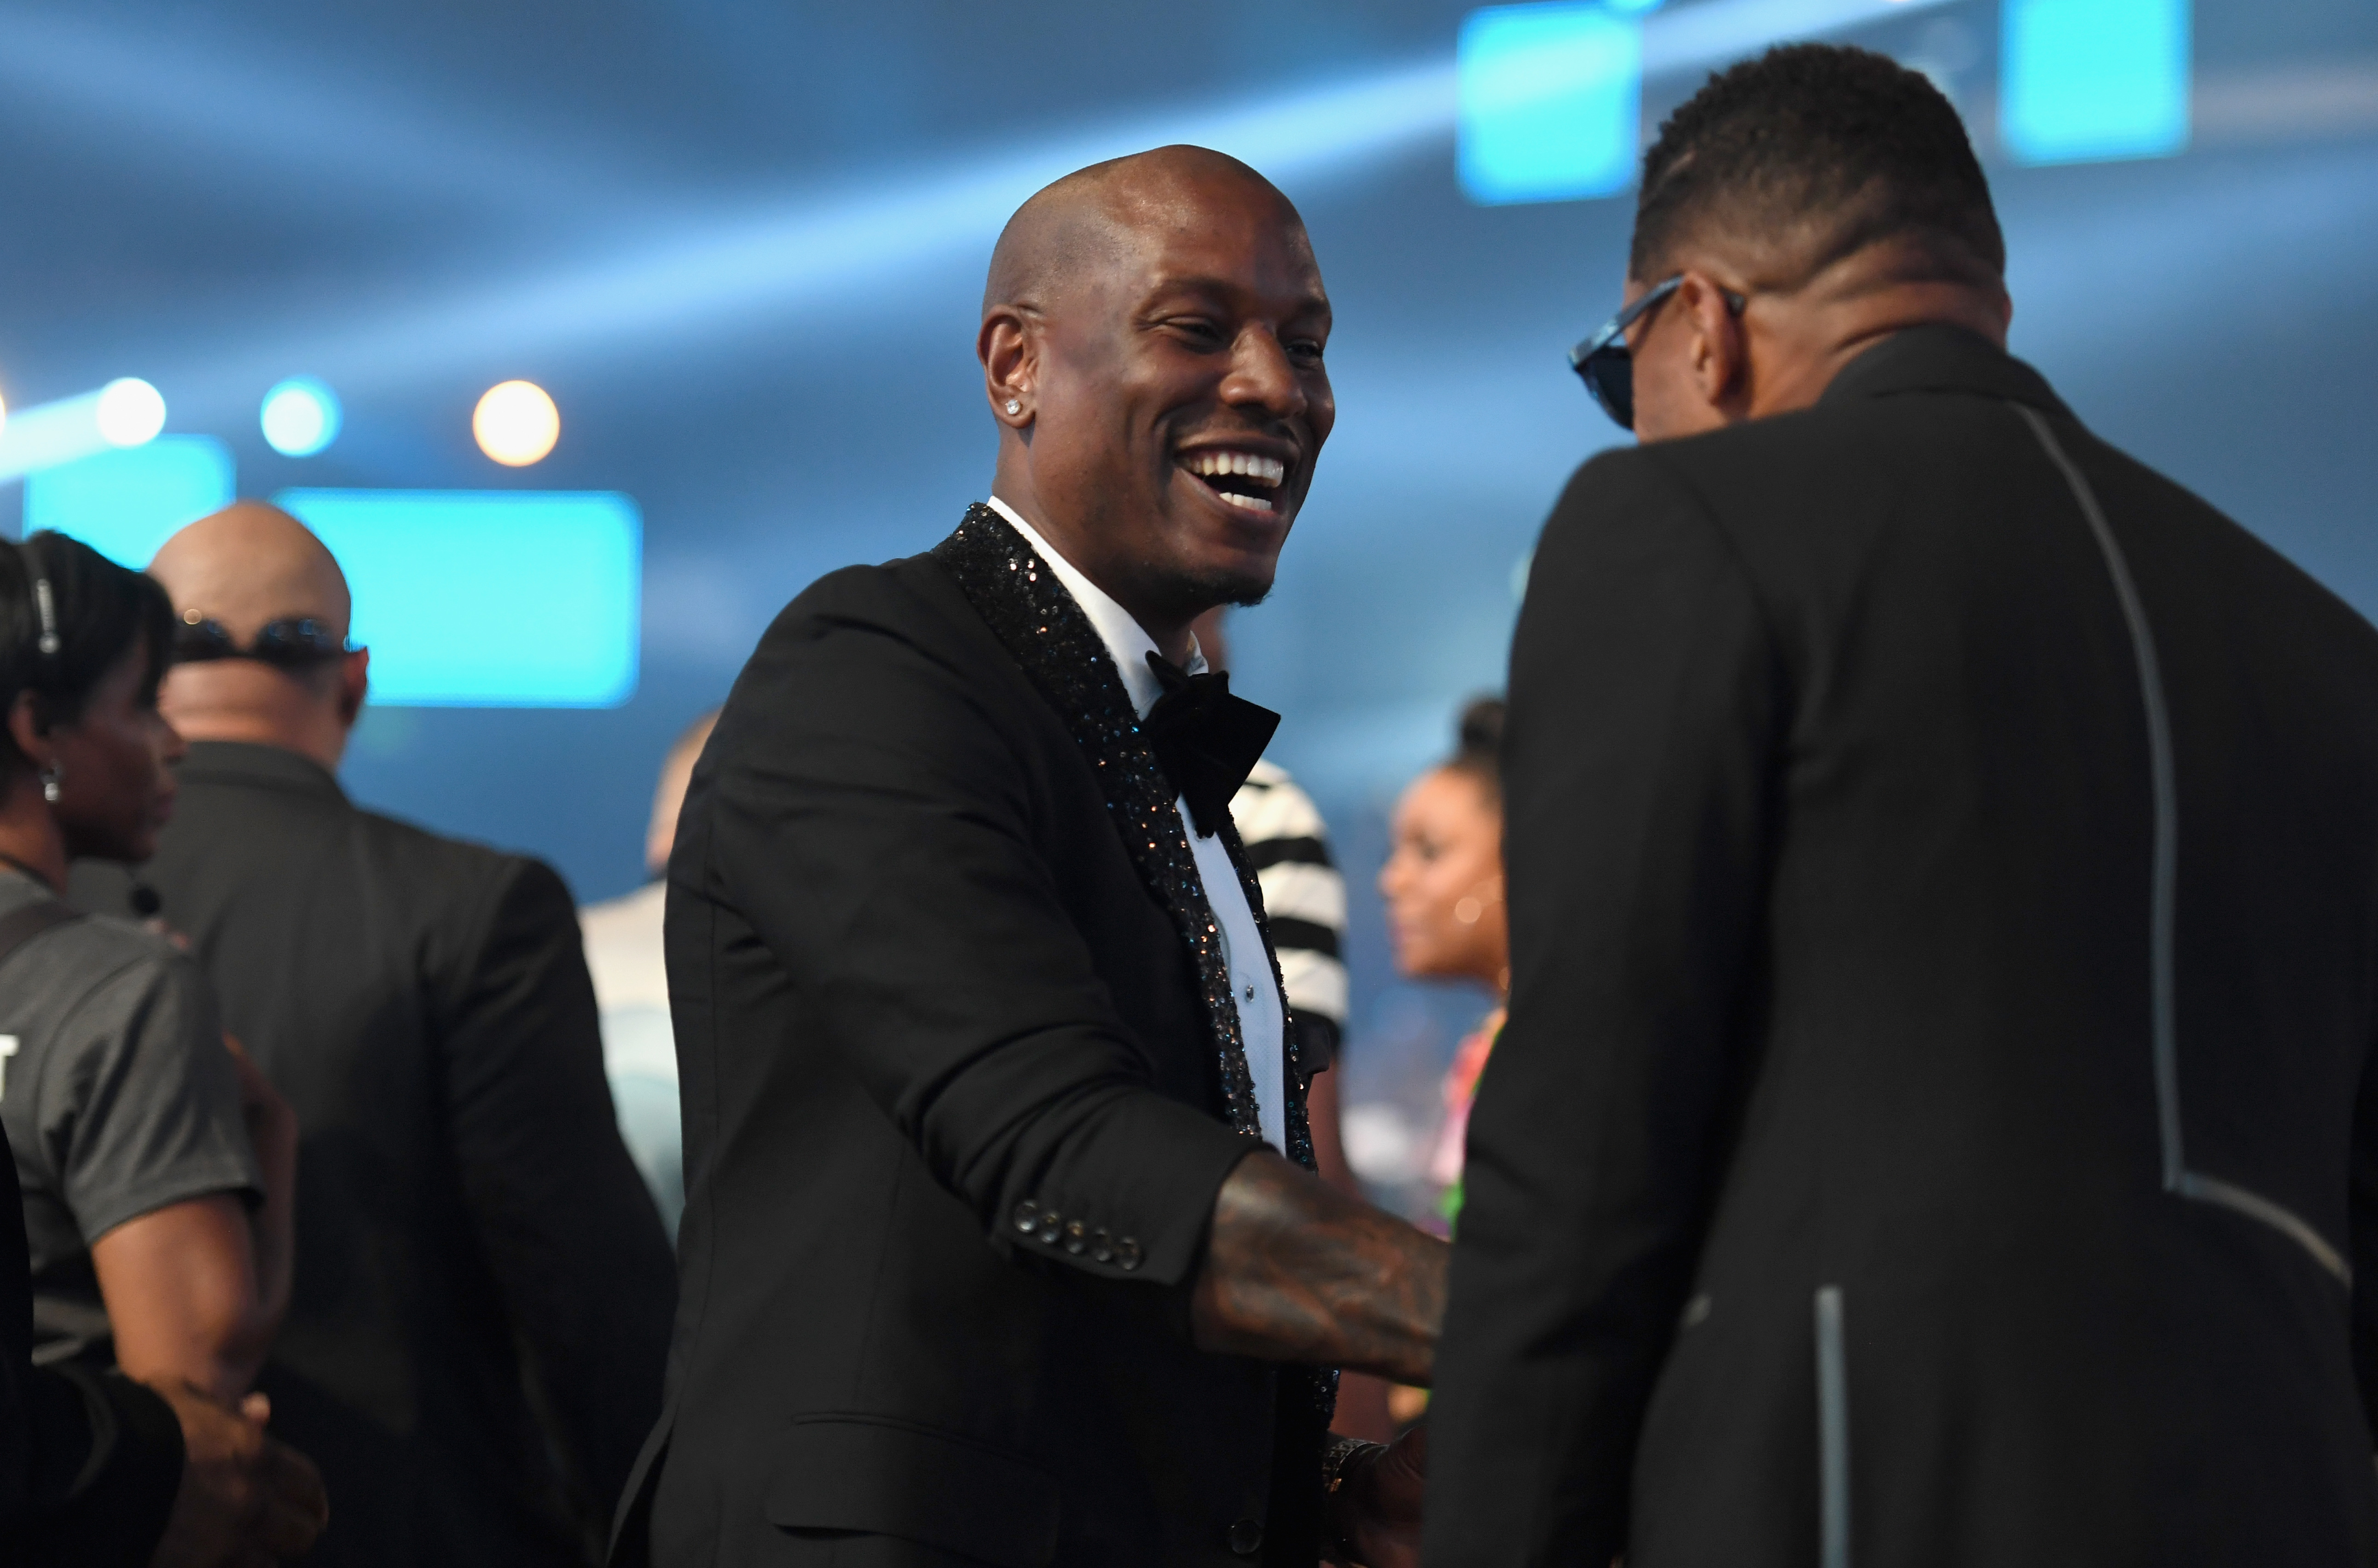 Tyrese & American Express Reportedly Settle On A Deal To Pay Off $61K Debt